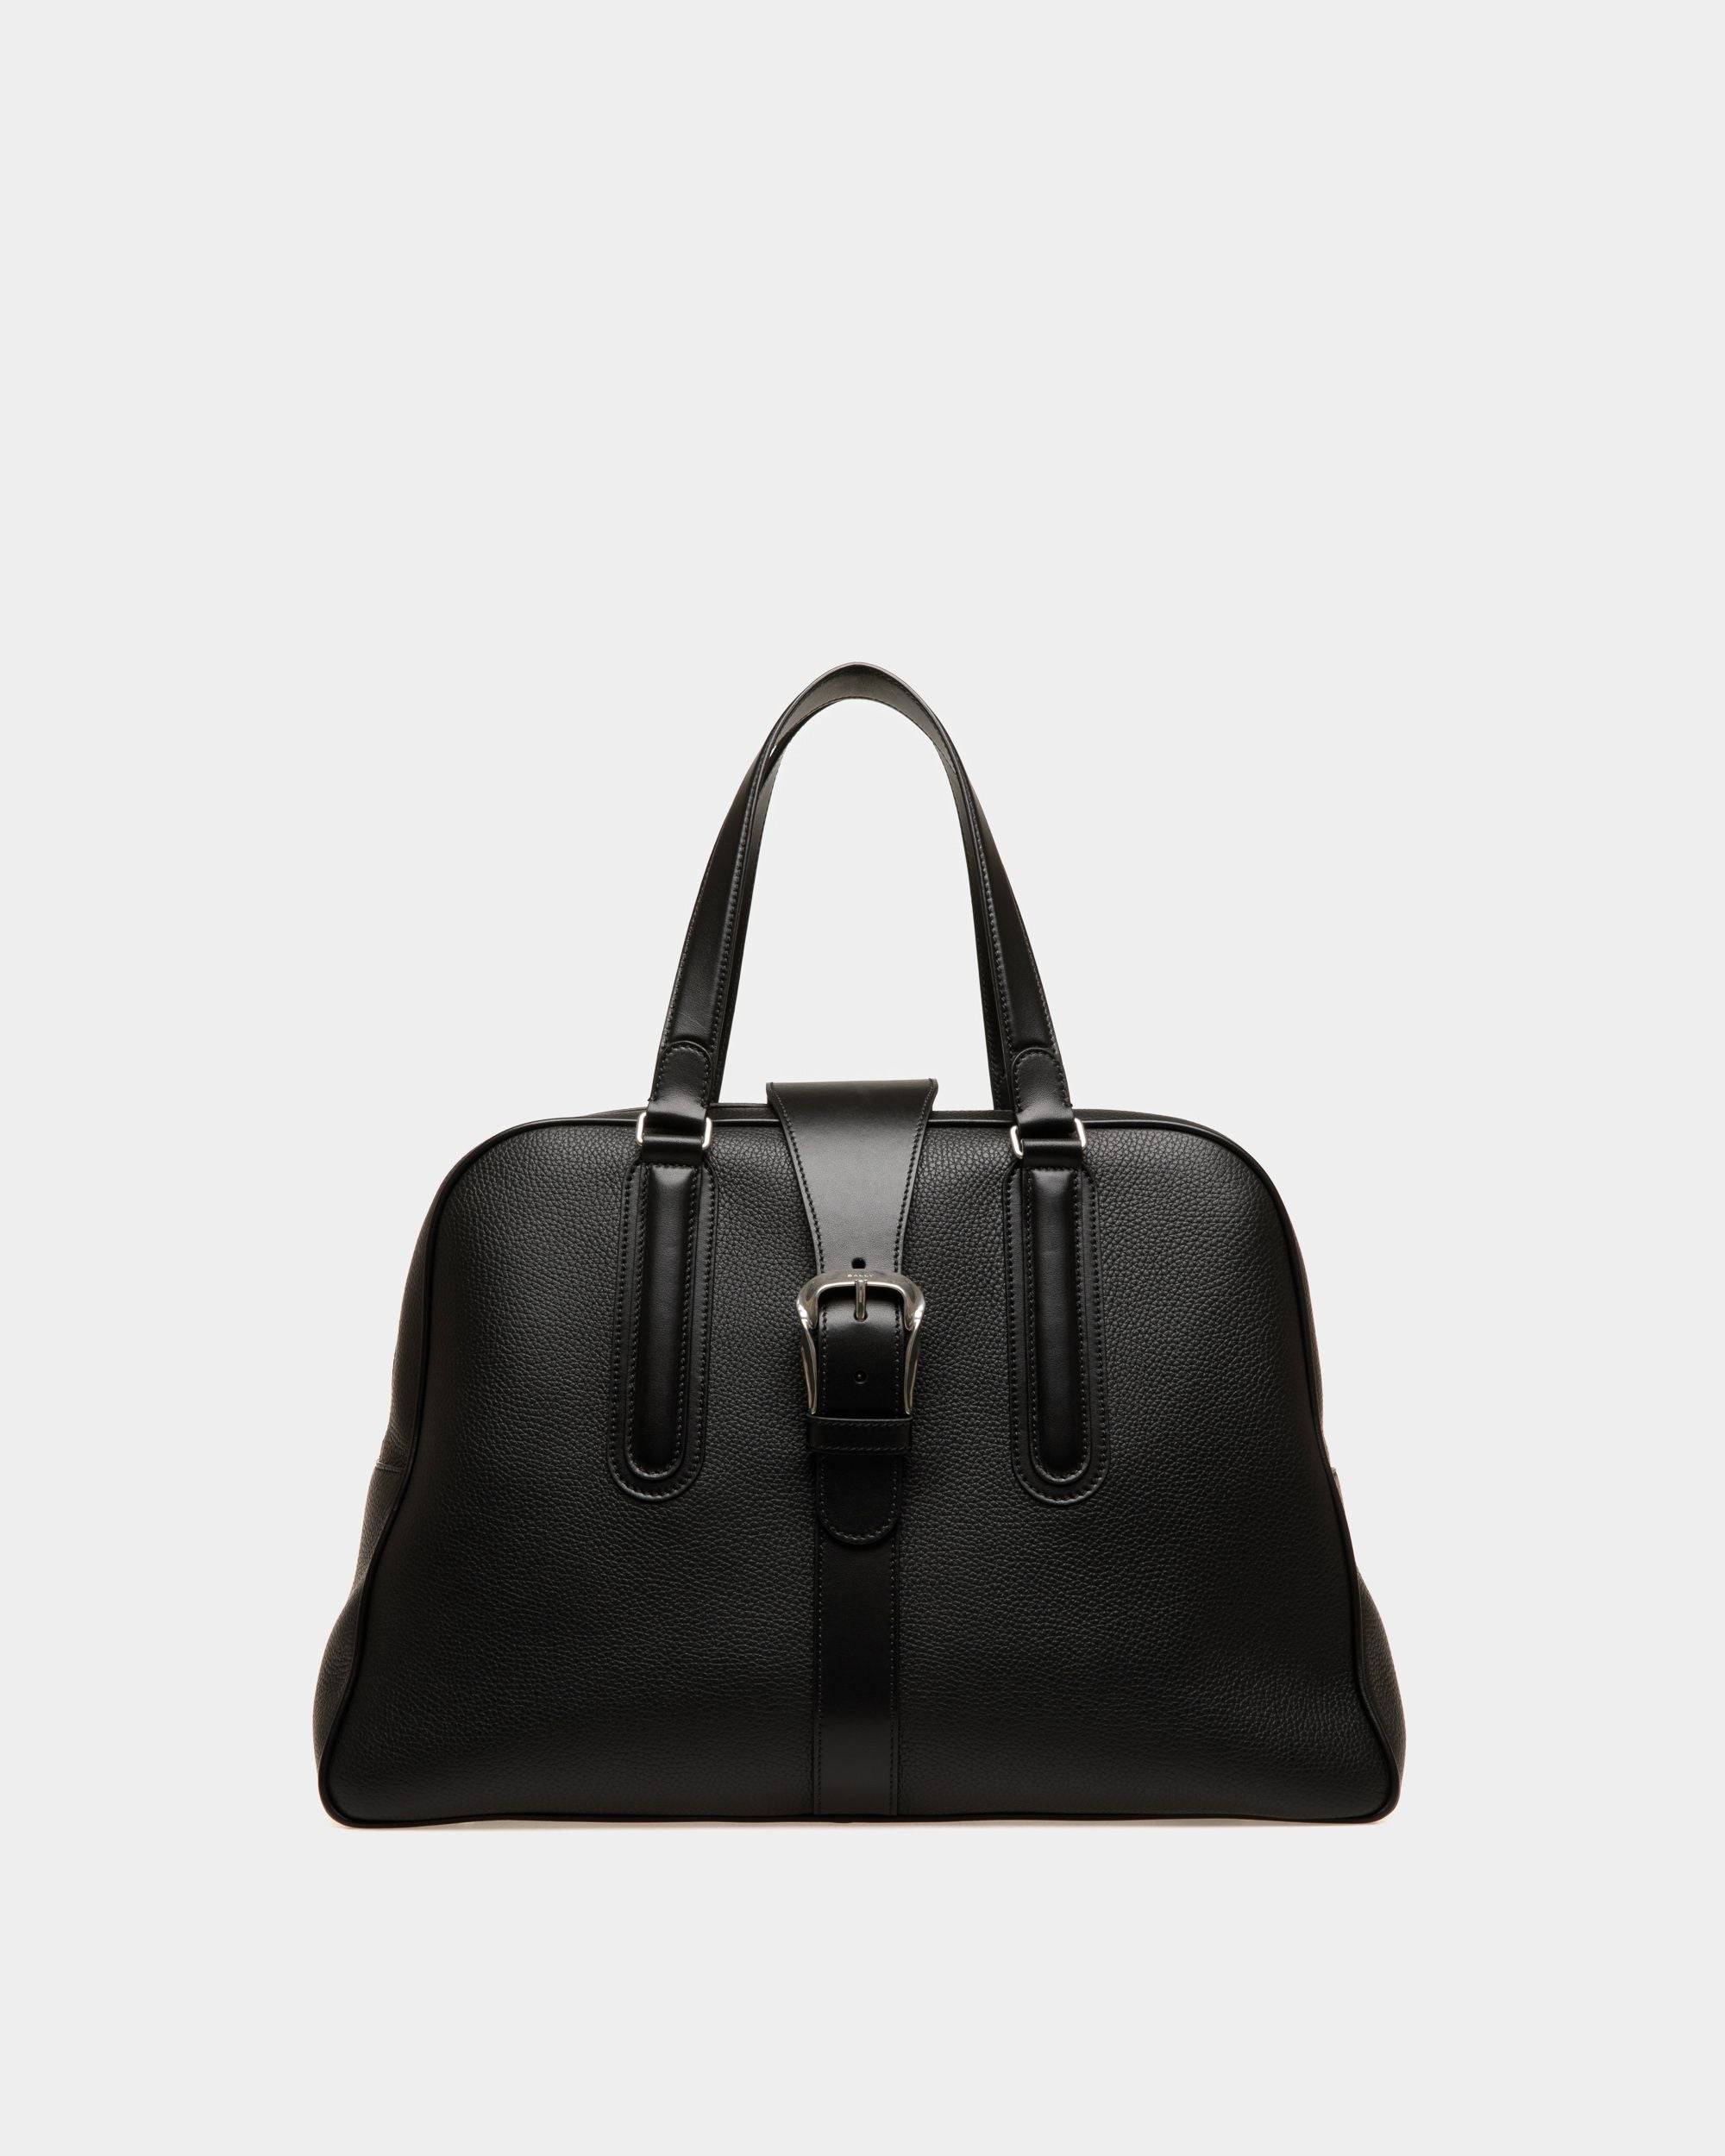 Men's Bowling Bag In Black Leather | Bally | Still Life Front